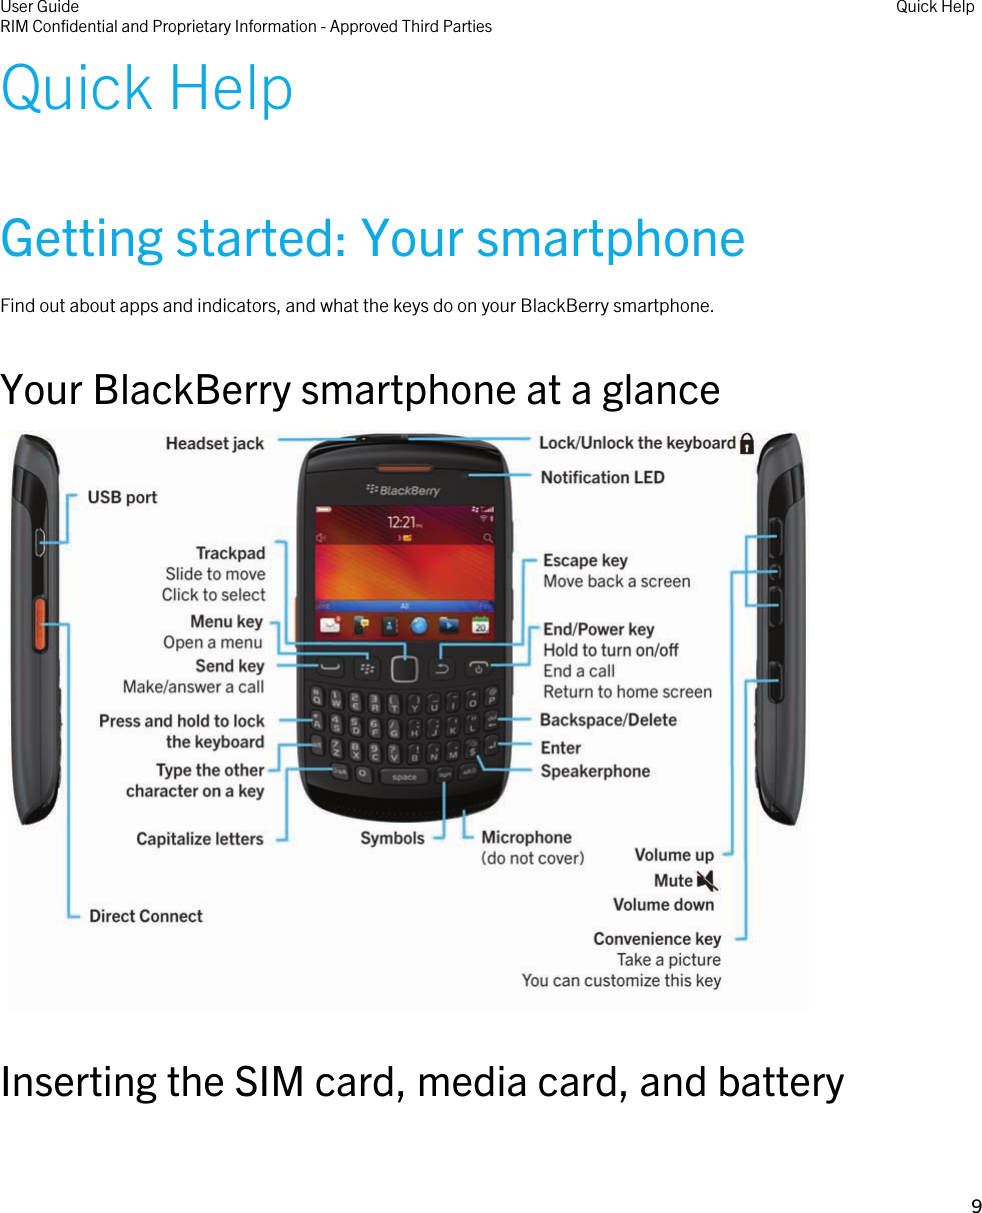 Quick HelpGetting started: Your smartphoneFind out about apps and indicators, and what the keys do on your BlackBerry smartphone.Your BlackBerry smartphone at a glance Inserting the SIM card, media card, and batteryUser GuideRIM Confidential and Proprietary Information - Approved Third Parties Quick Help9 